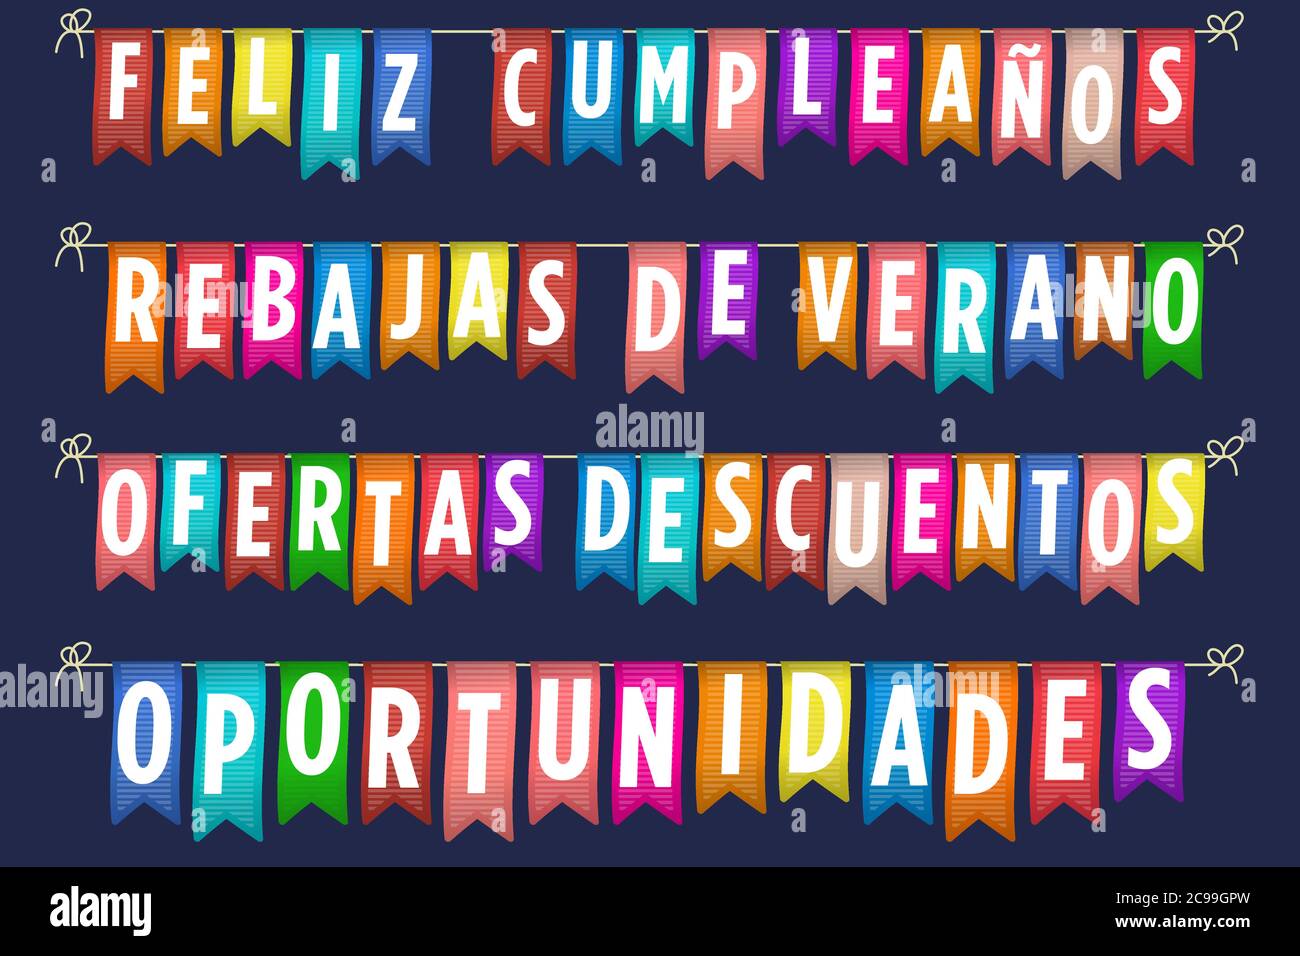 Vector illustration. Happy birthday and sales banner in spanish. Stock Vector